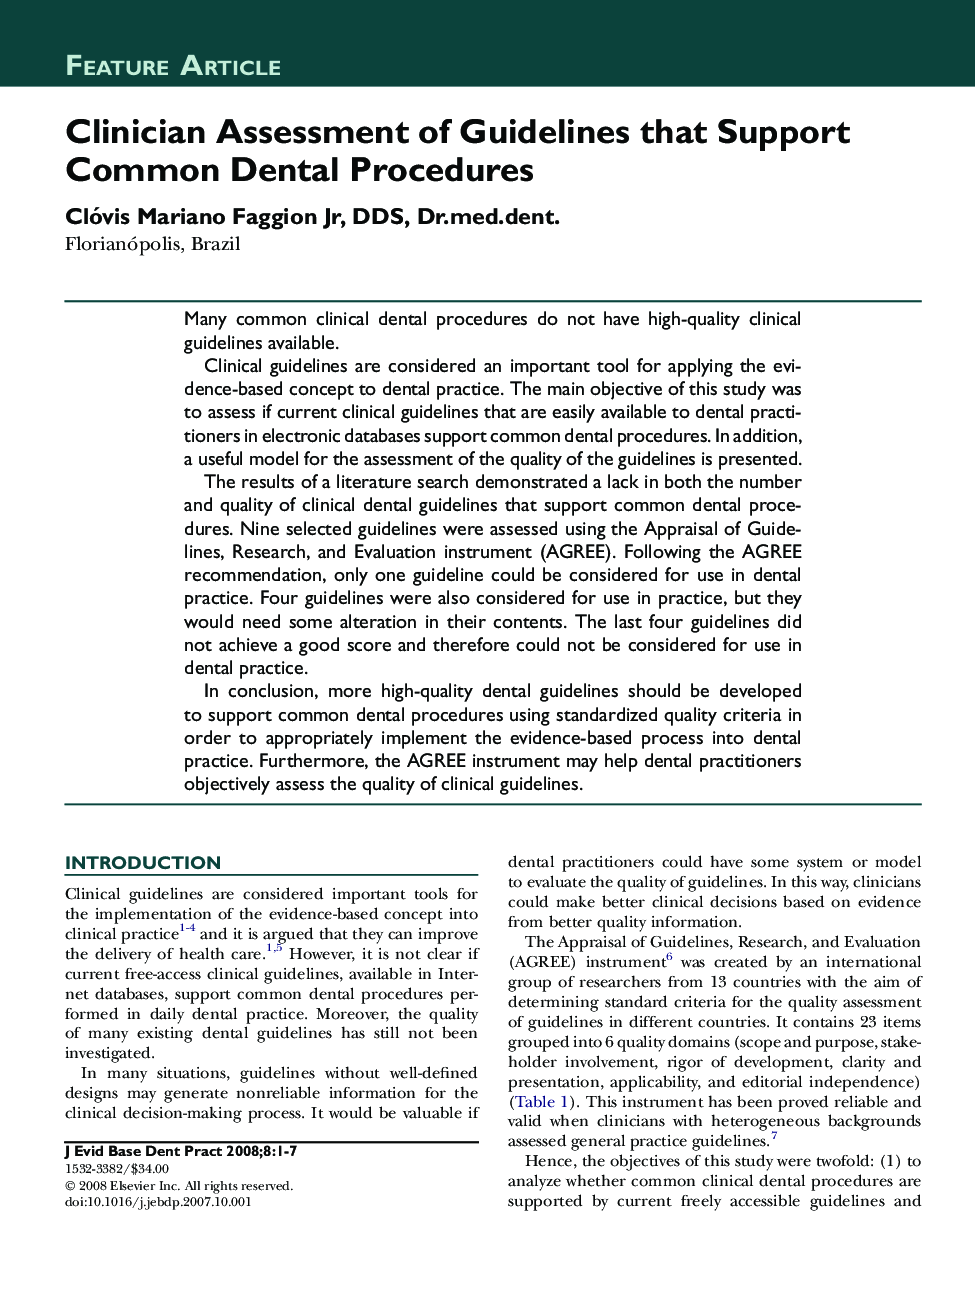 Clinician Assessment of Guidelines that Support Common Dental Procedures